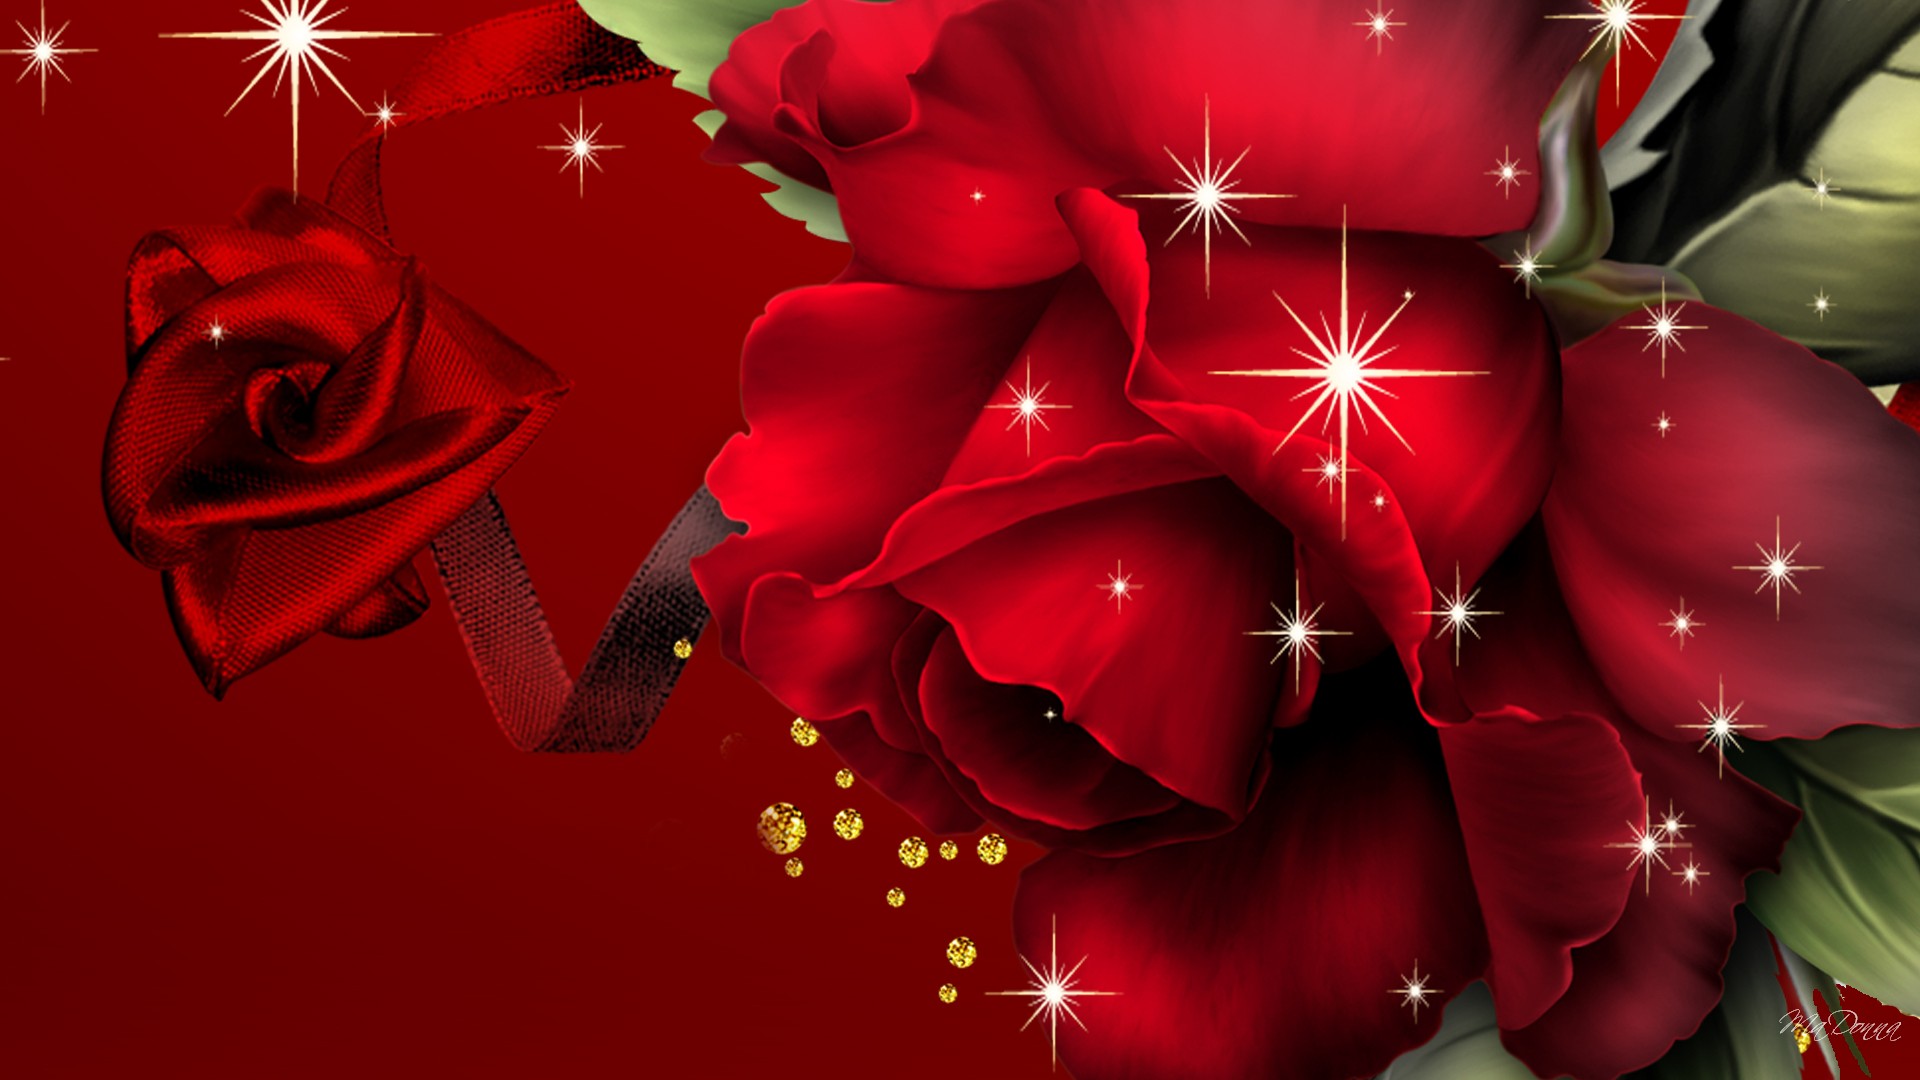 big red roses free wallpapers hd